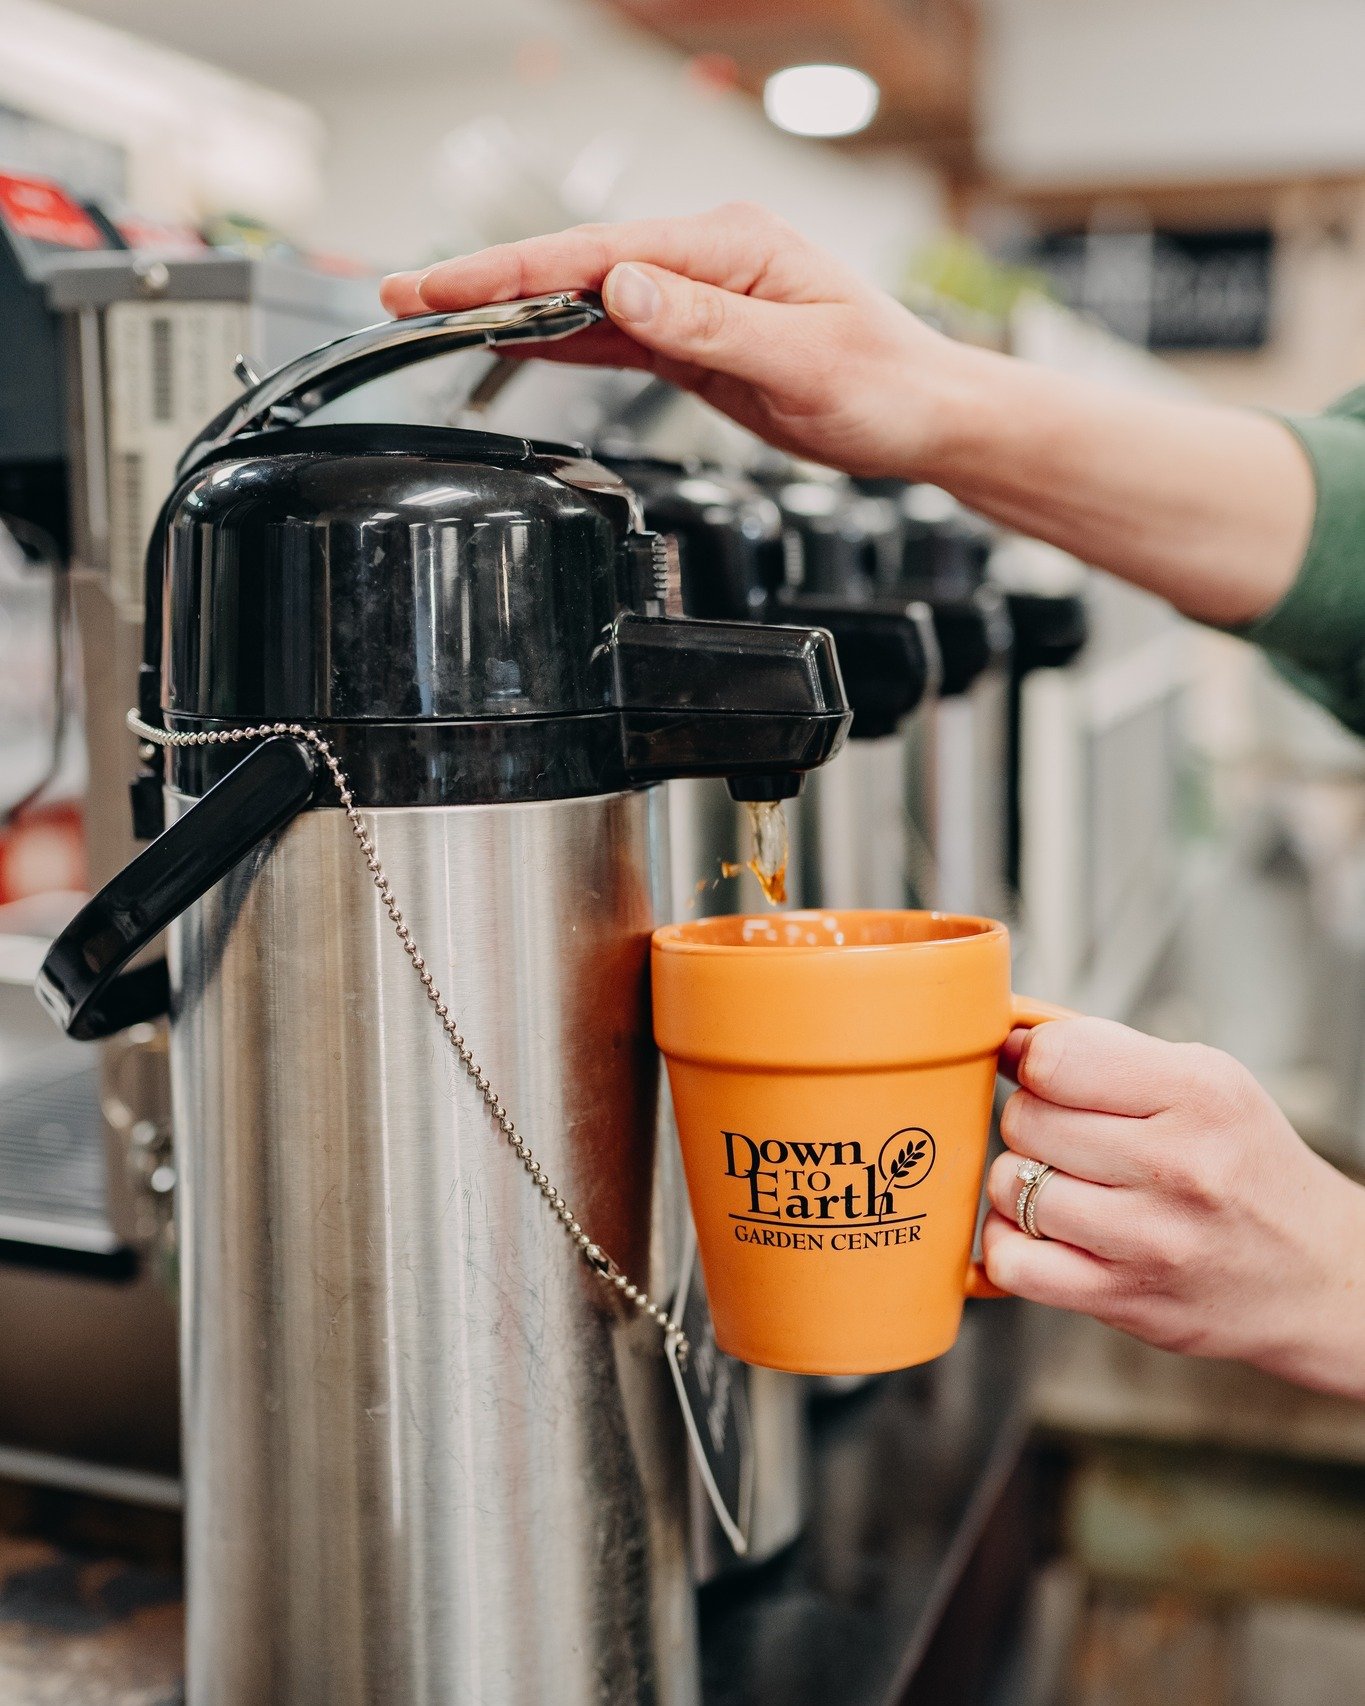 Brewing up sunshine, one cup at a time! ☀ Mornings and conversations are better with coffee! 😄

#fiveandtwocafe #eauclaire #localmarket